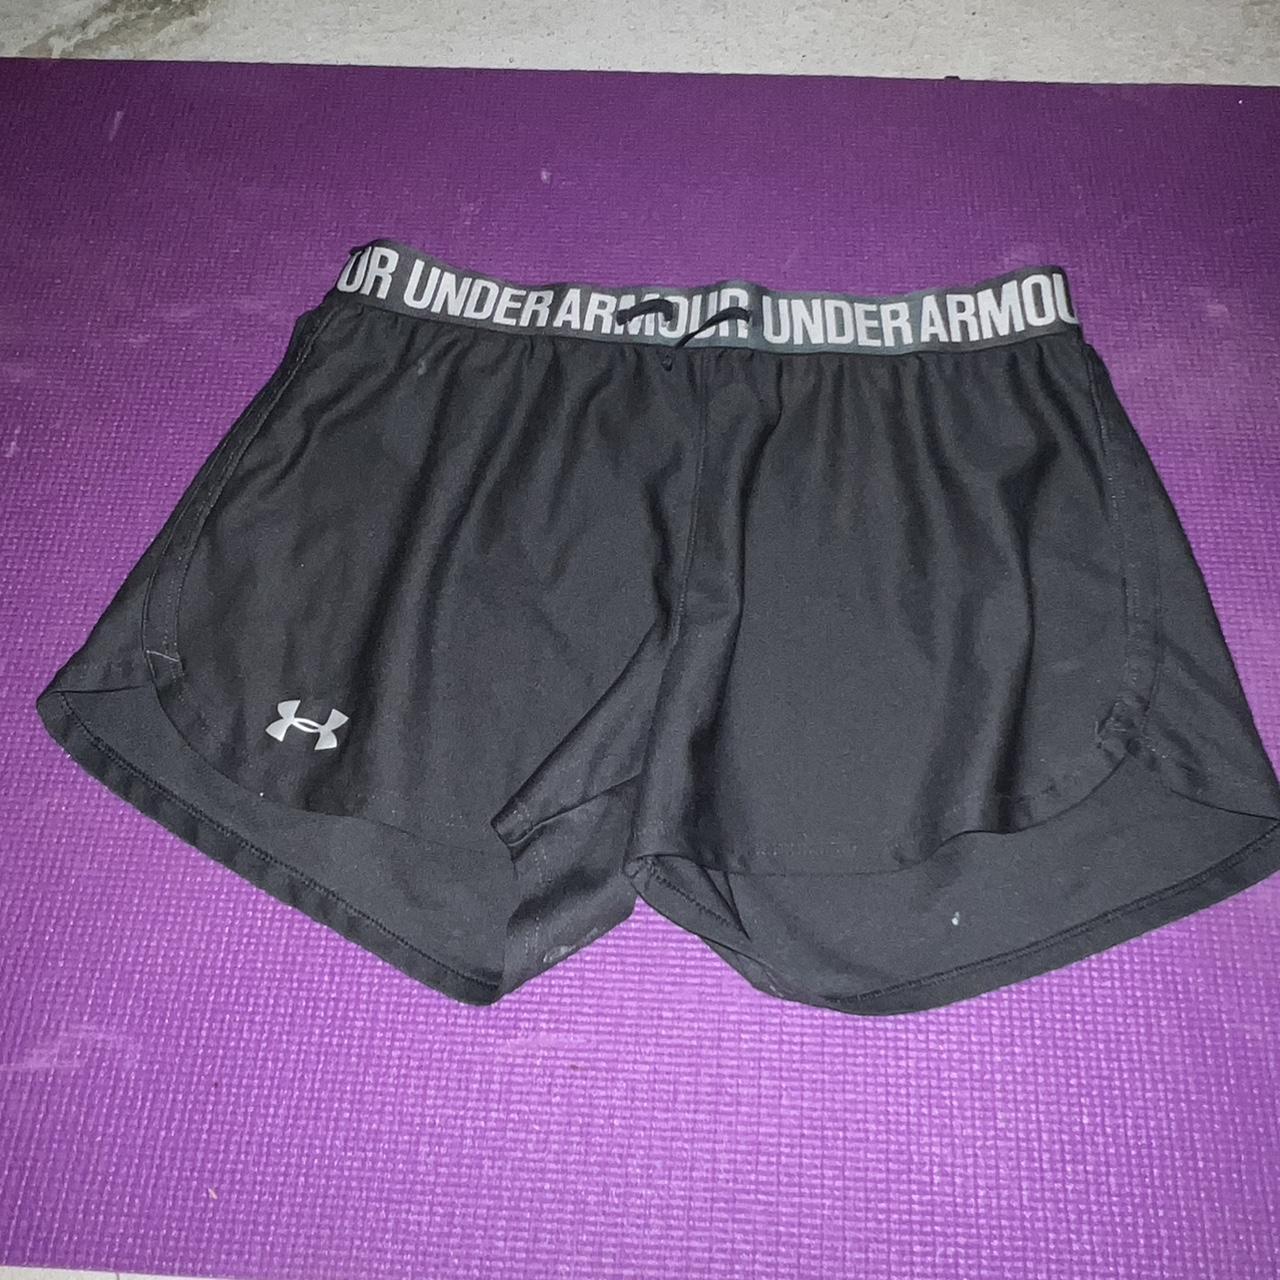 Grey under armor shorts! Worn once is perfect... - Depop